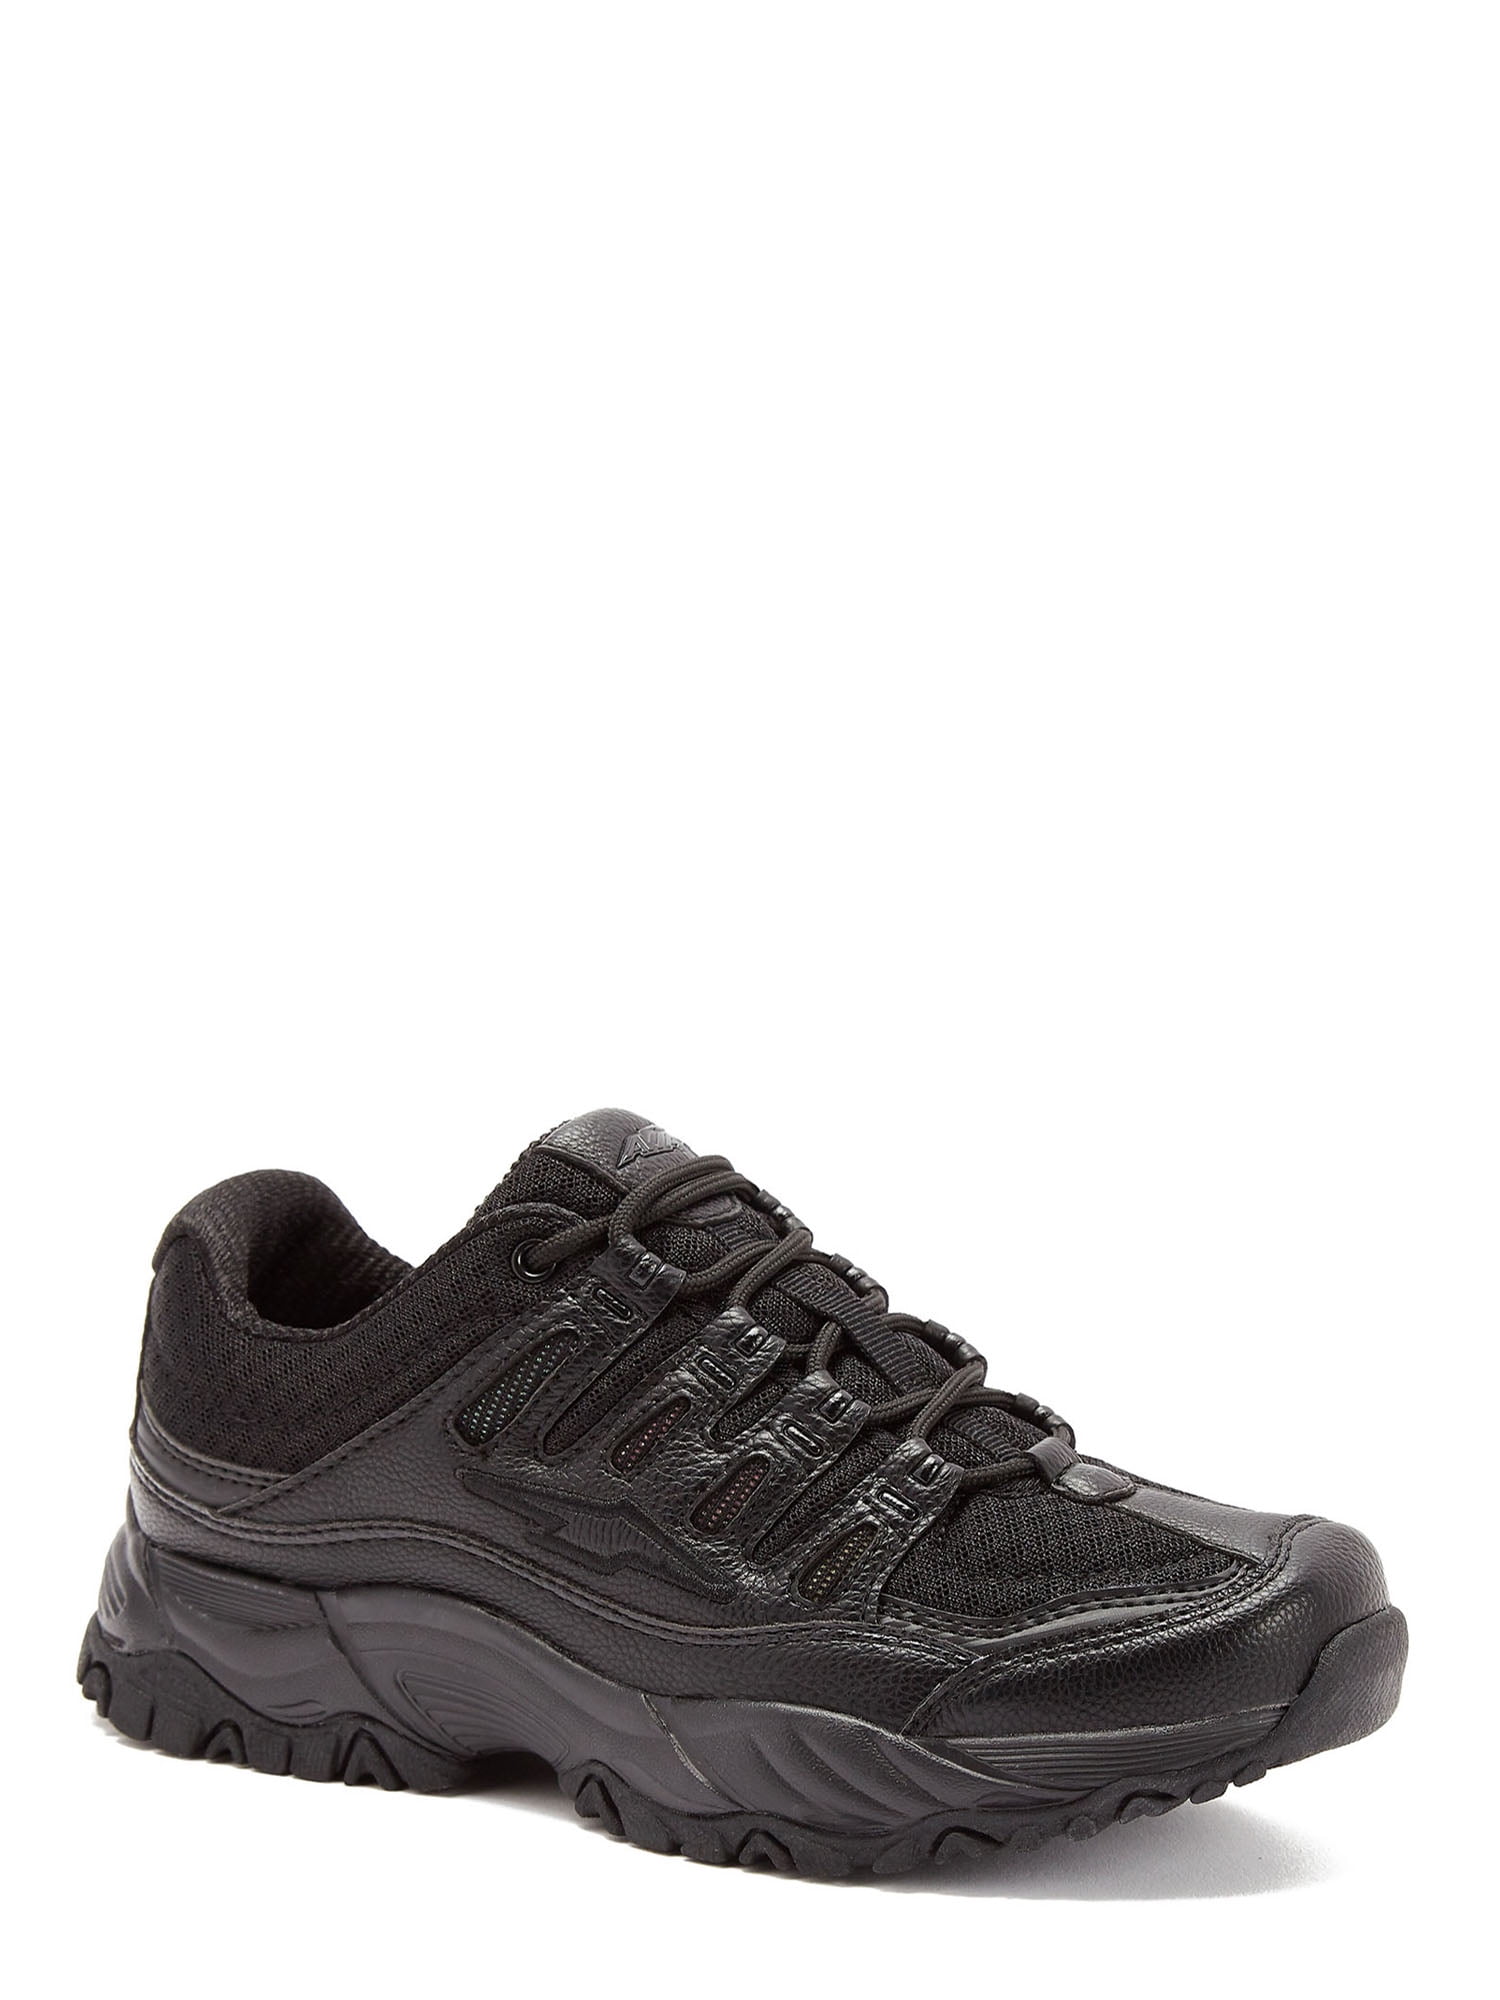 Avia Women's Elevate Athletic Sneaker, Wide Width Available